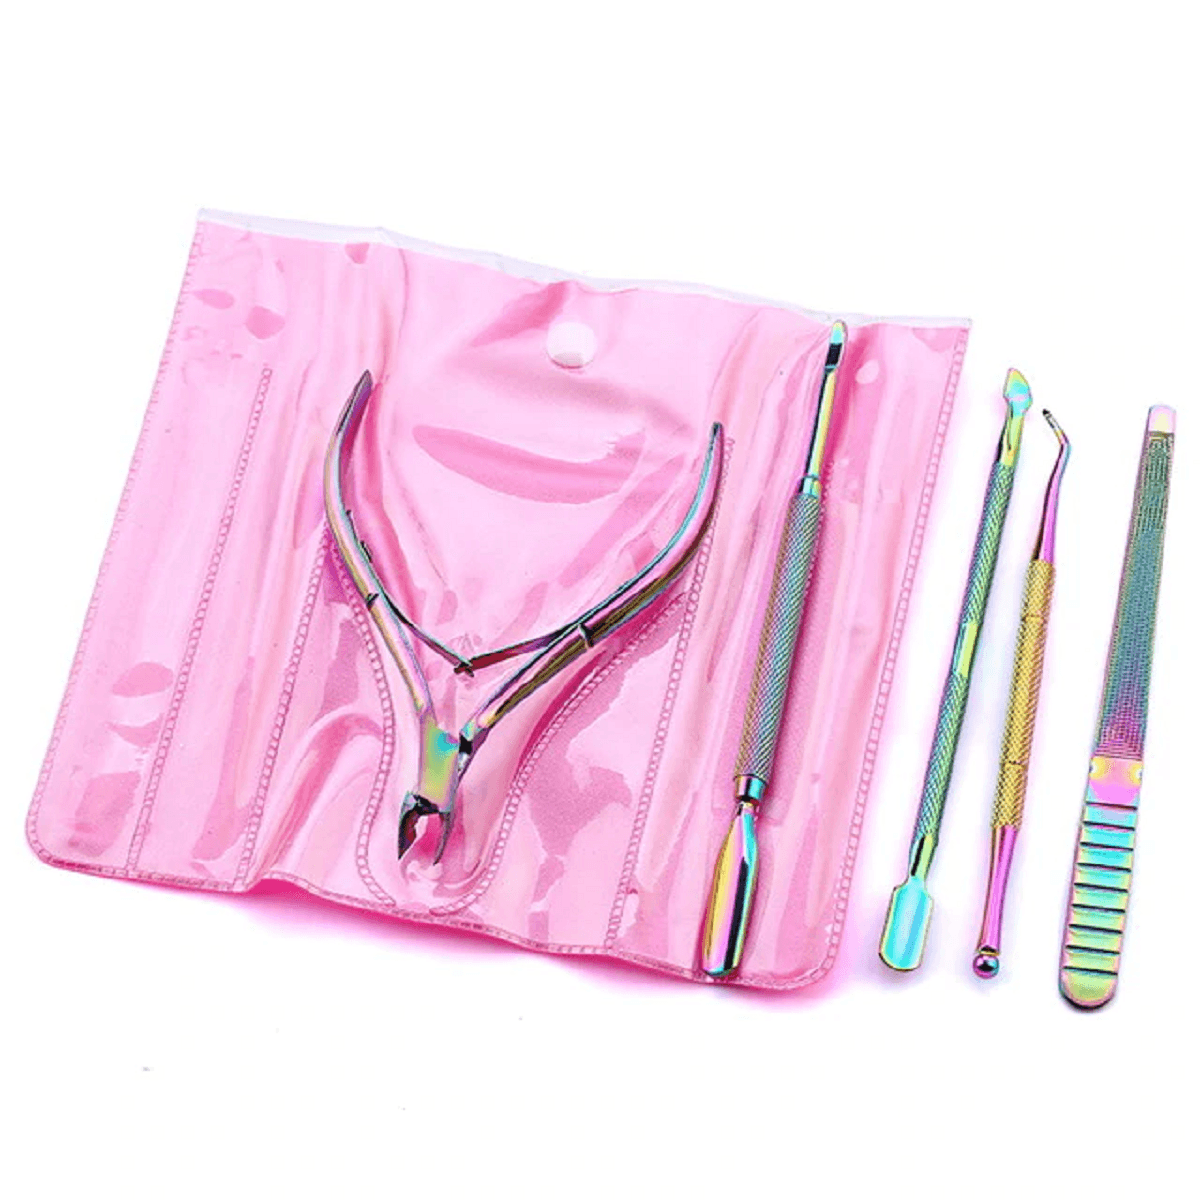 Nail Shaping and Cleaning Tools Set - Professional Set - dealskart.com.au